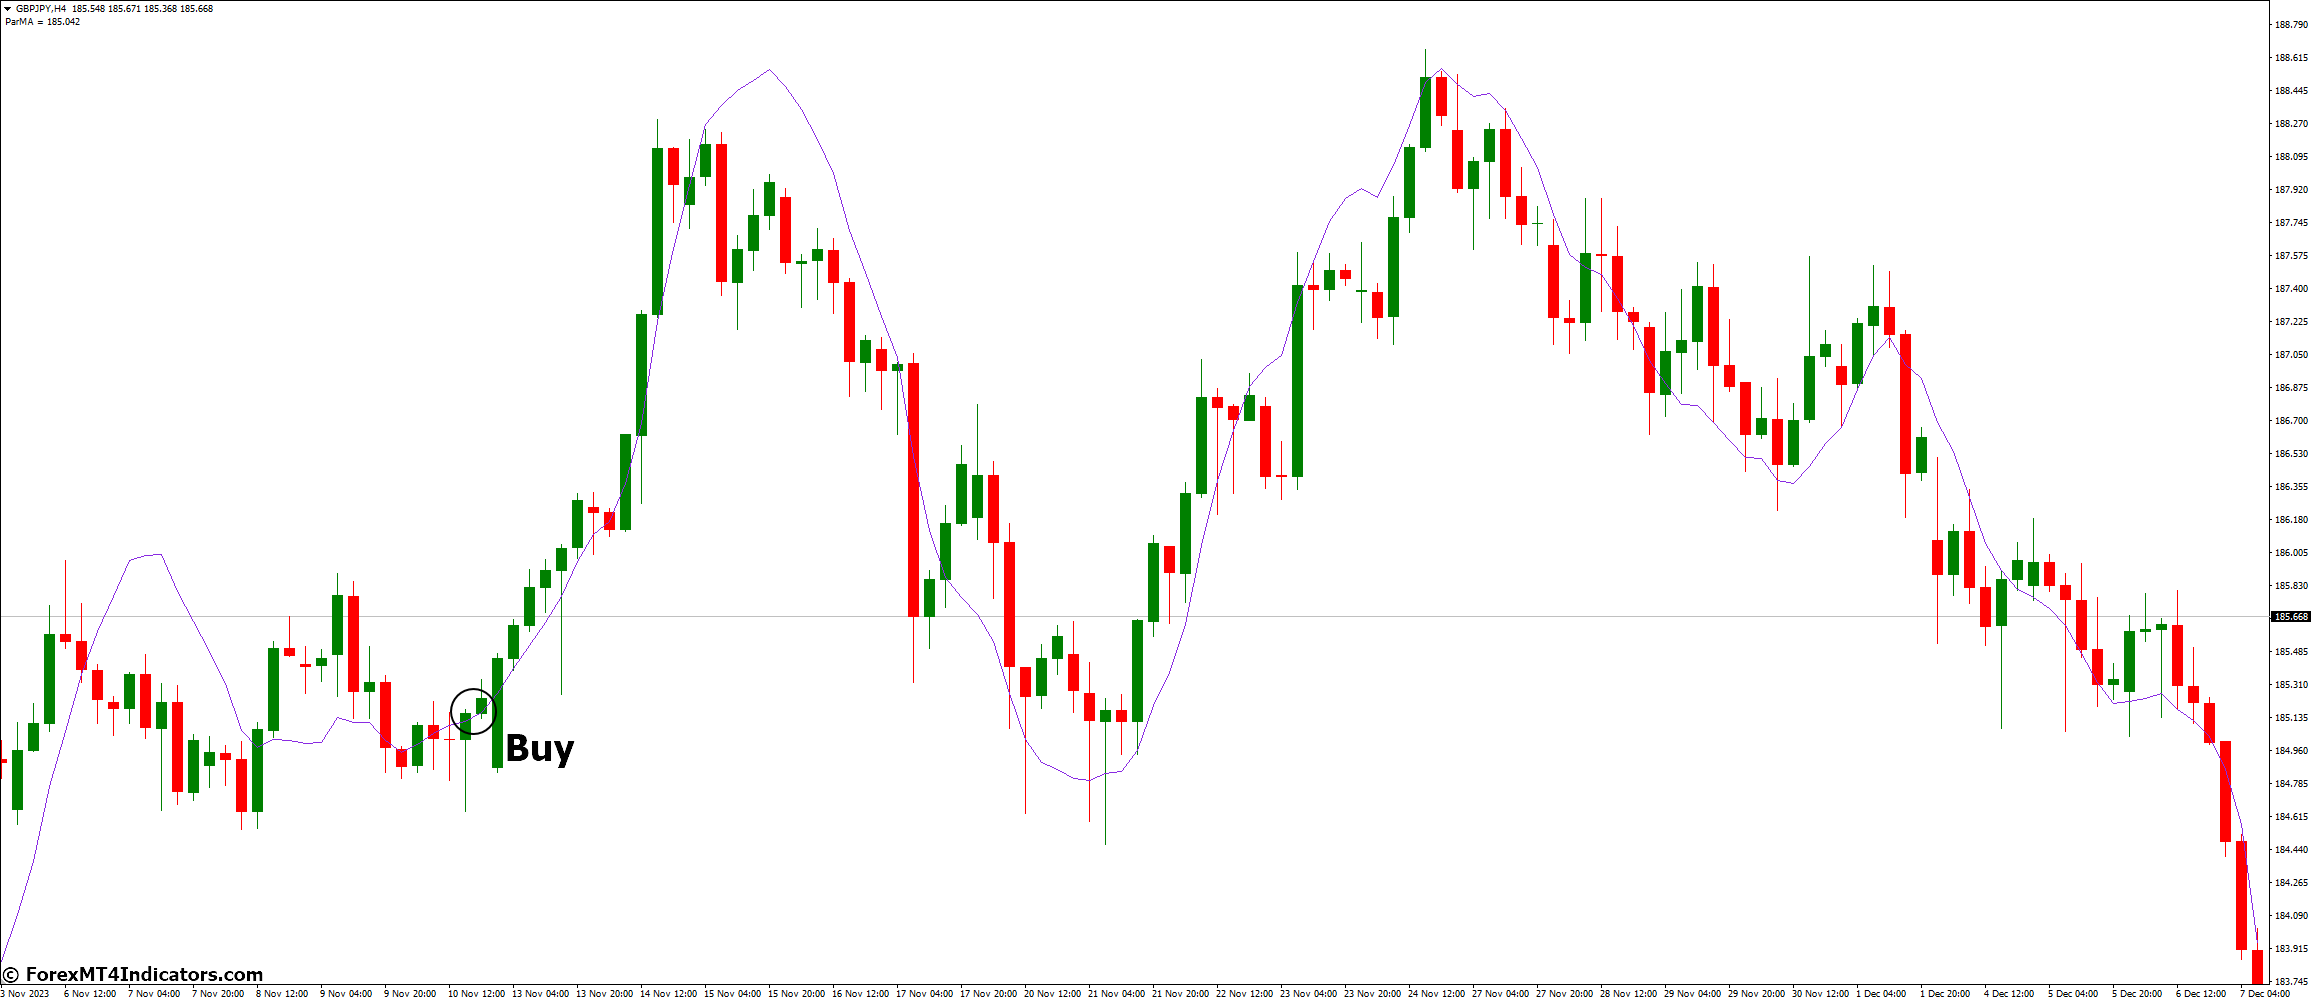 How to Trade with ParMA BB Indicator - Buy Entry